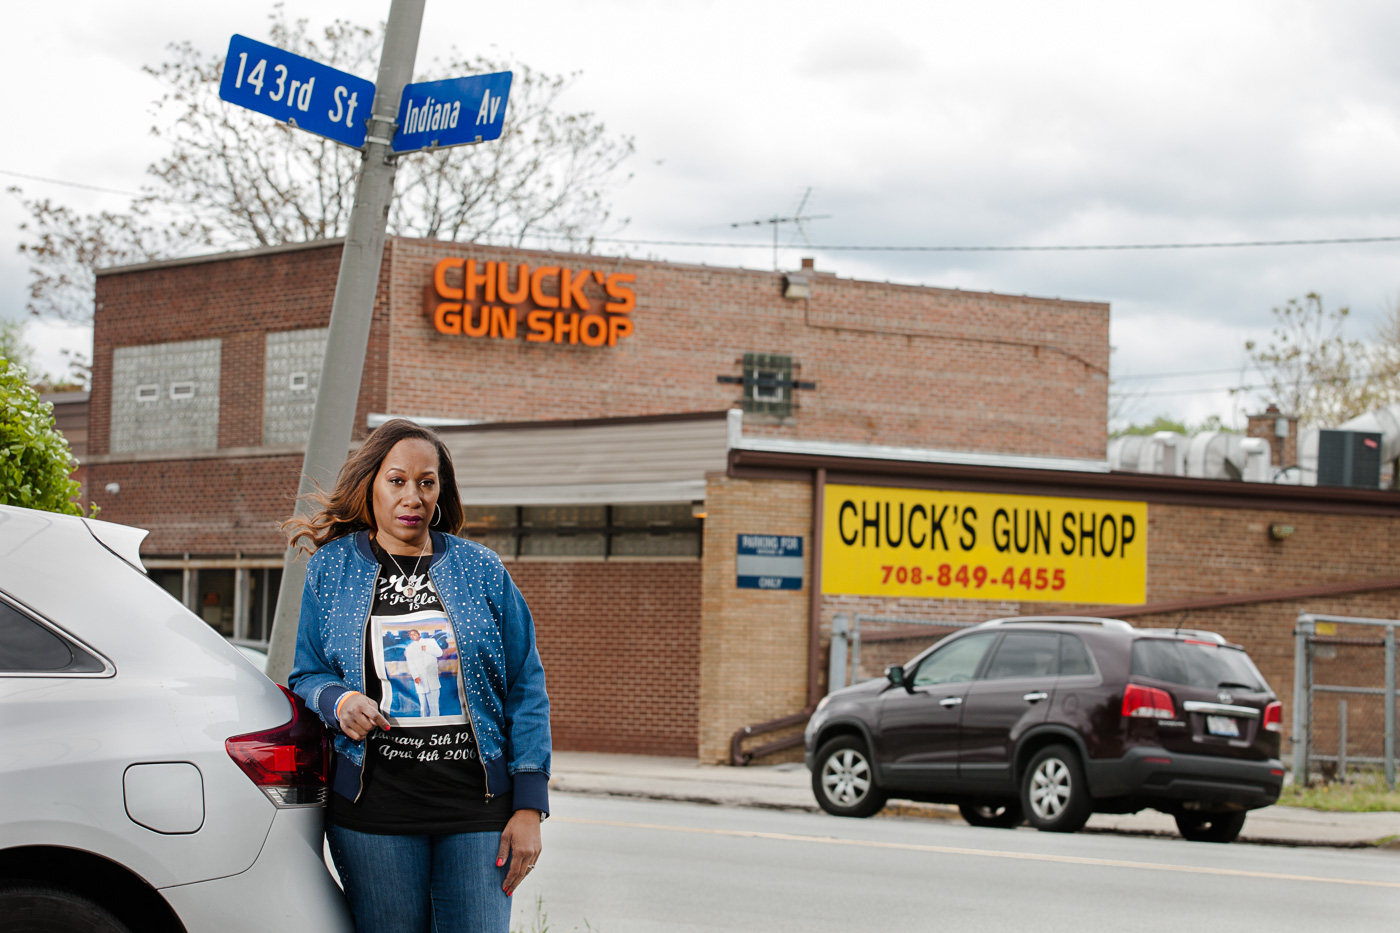 editorial photographer Chicago - an African American woman stands in front of a gun shop in Chicago